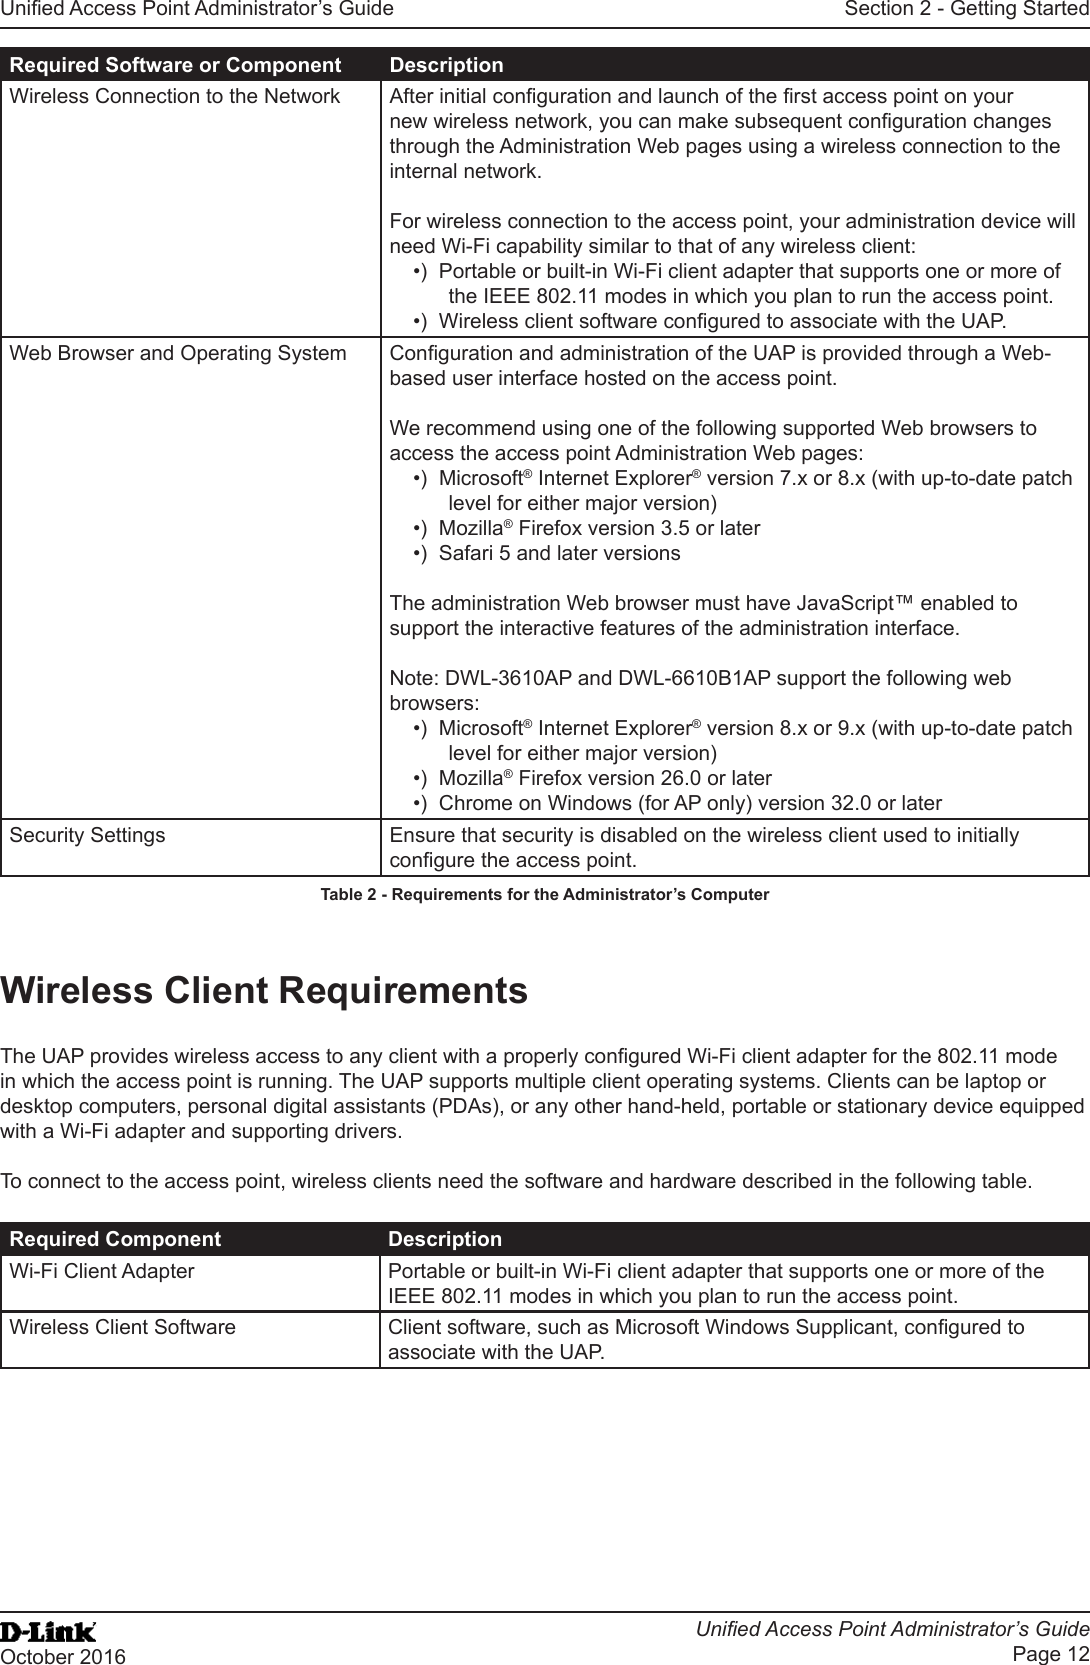 Unied Access Point Administrator’s GuideUnied Access Point Administrator’s GuidePage 12October 2016Section 2 - Getting StartedRequired Software or Component DescriptionWireless Connection to the Network After initial conguration and launch of the rst access point on your new wireless network, you can make subsequent conguration changes through the Administration Web pages using a wireless connection to the internal network. For wireless connection to the access point, your administration device will need Wi-Fi capability similar to that of any wireless client:•)  Portable or built-in Wi-Fi client adapter that supports one or more of the IEEE 802.11 modes in which you plan to run the access point.•)  Wireless client software congured to associate with the UAP.Web Browser and Operating System Conguration and administration of the UAP is provided through a Web-based user interface hosted on the access point. We recommend using one of the following supported Web browsers to access the access point Administration Web pages:•)  Microsoft® Internet Explorer® version 7.x or 8.x (with up-to-date patch level for either major version)•)  Mozilla® Firefox version 3.5 or later•)  Safari 5 and later versionsThe administration Web browser must have JavaScript™ enabled to support the interactive features of the administration interface.Note: DWL-3610AP and DWL-6610B1AP support the following web browsers:•)  Microsoft® Internet Explorer® version 8.x or 9.x (with up-to-date patch level for either major version)•)  Mozilla® Firefox version 26.0 or later•)  Chrome on Windows (for AP only) version 32.0 or laterSecurity Settings Ensure that security is disabled on the wireless client used to initially congure the access point.Table 2 - Requirements for the Administrator’s ComputerWireless Client RequirementsThe UAP provides wireless access to any client with a properly congured Wi-Fi client adapter for the 802.11 mode in which the access point is running. The UAP supports multiple client operating systems. Clients can be laptop or desktop computers, personal digital assistants (PDAs), or any other hand-held, portable or stationary device equipped with a Wi-Fi adapter and supporting drivers.To connect to the access point, wireless clients need the software and hardware described in the following table.Required Component DescriptionWi-Fi Client Adapter Portable or built-in Wi-Fi client adapter that supports one or more of the IEEE 802.11 modes in which you plan to run the access point.Wireless Client Software Client software, such as Microsoft Windows Supplicant, congured to associate with the UAP.